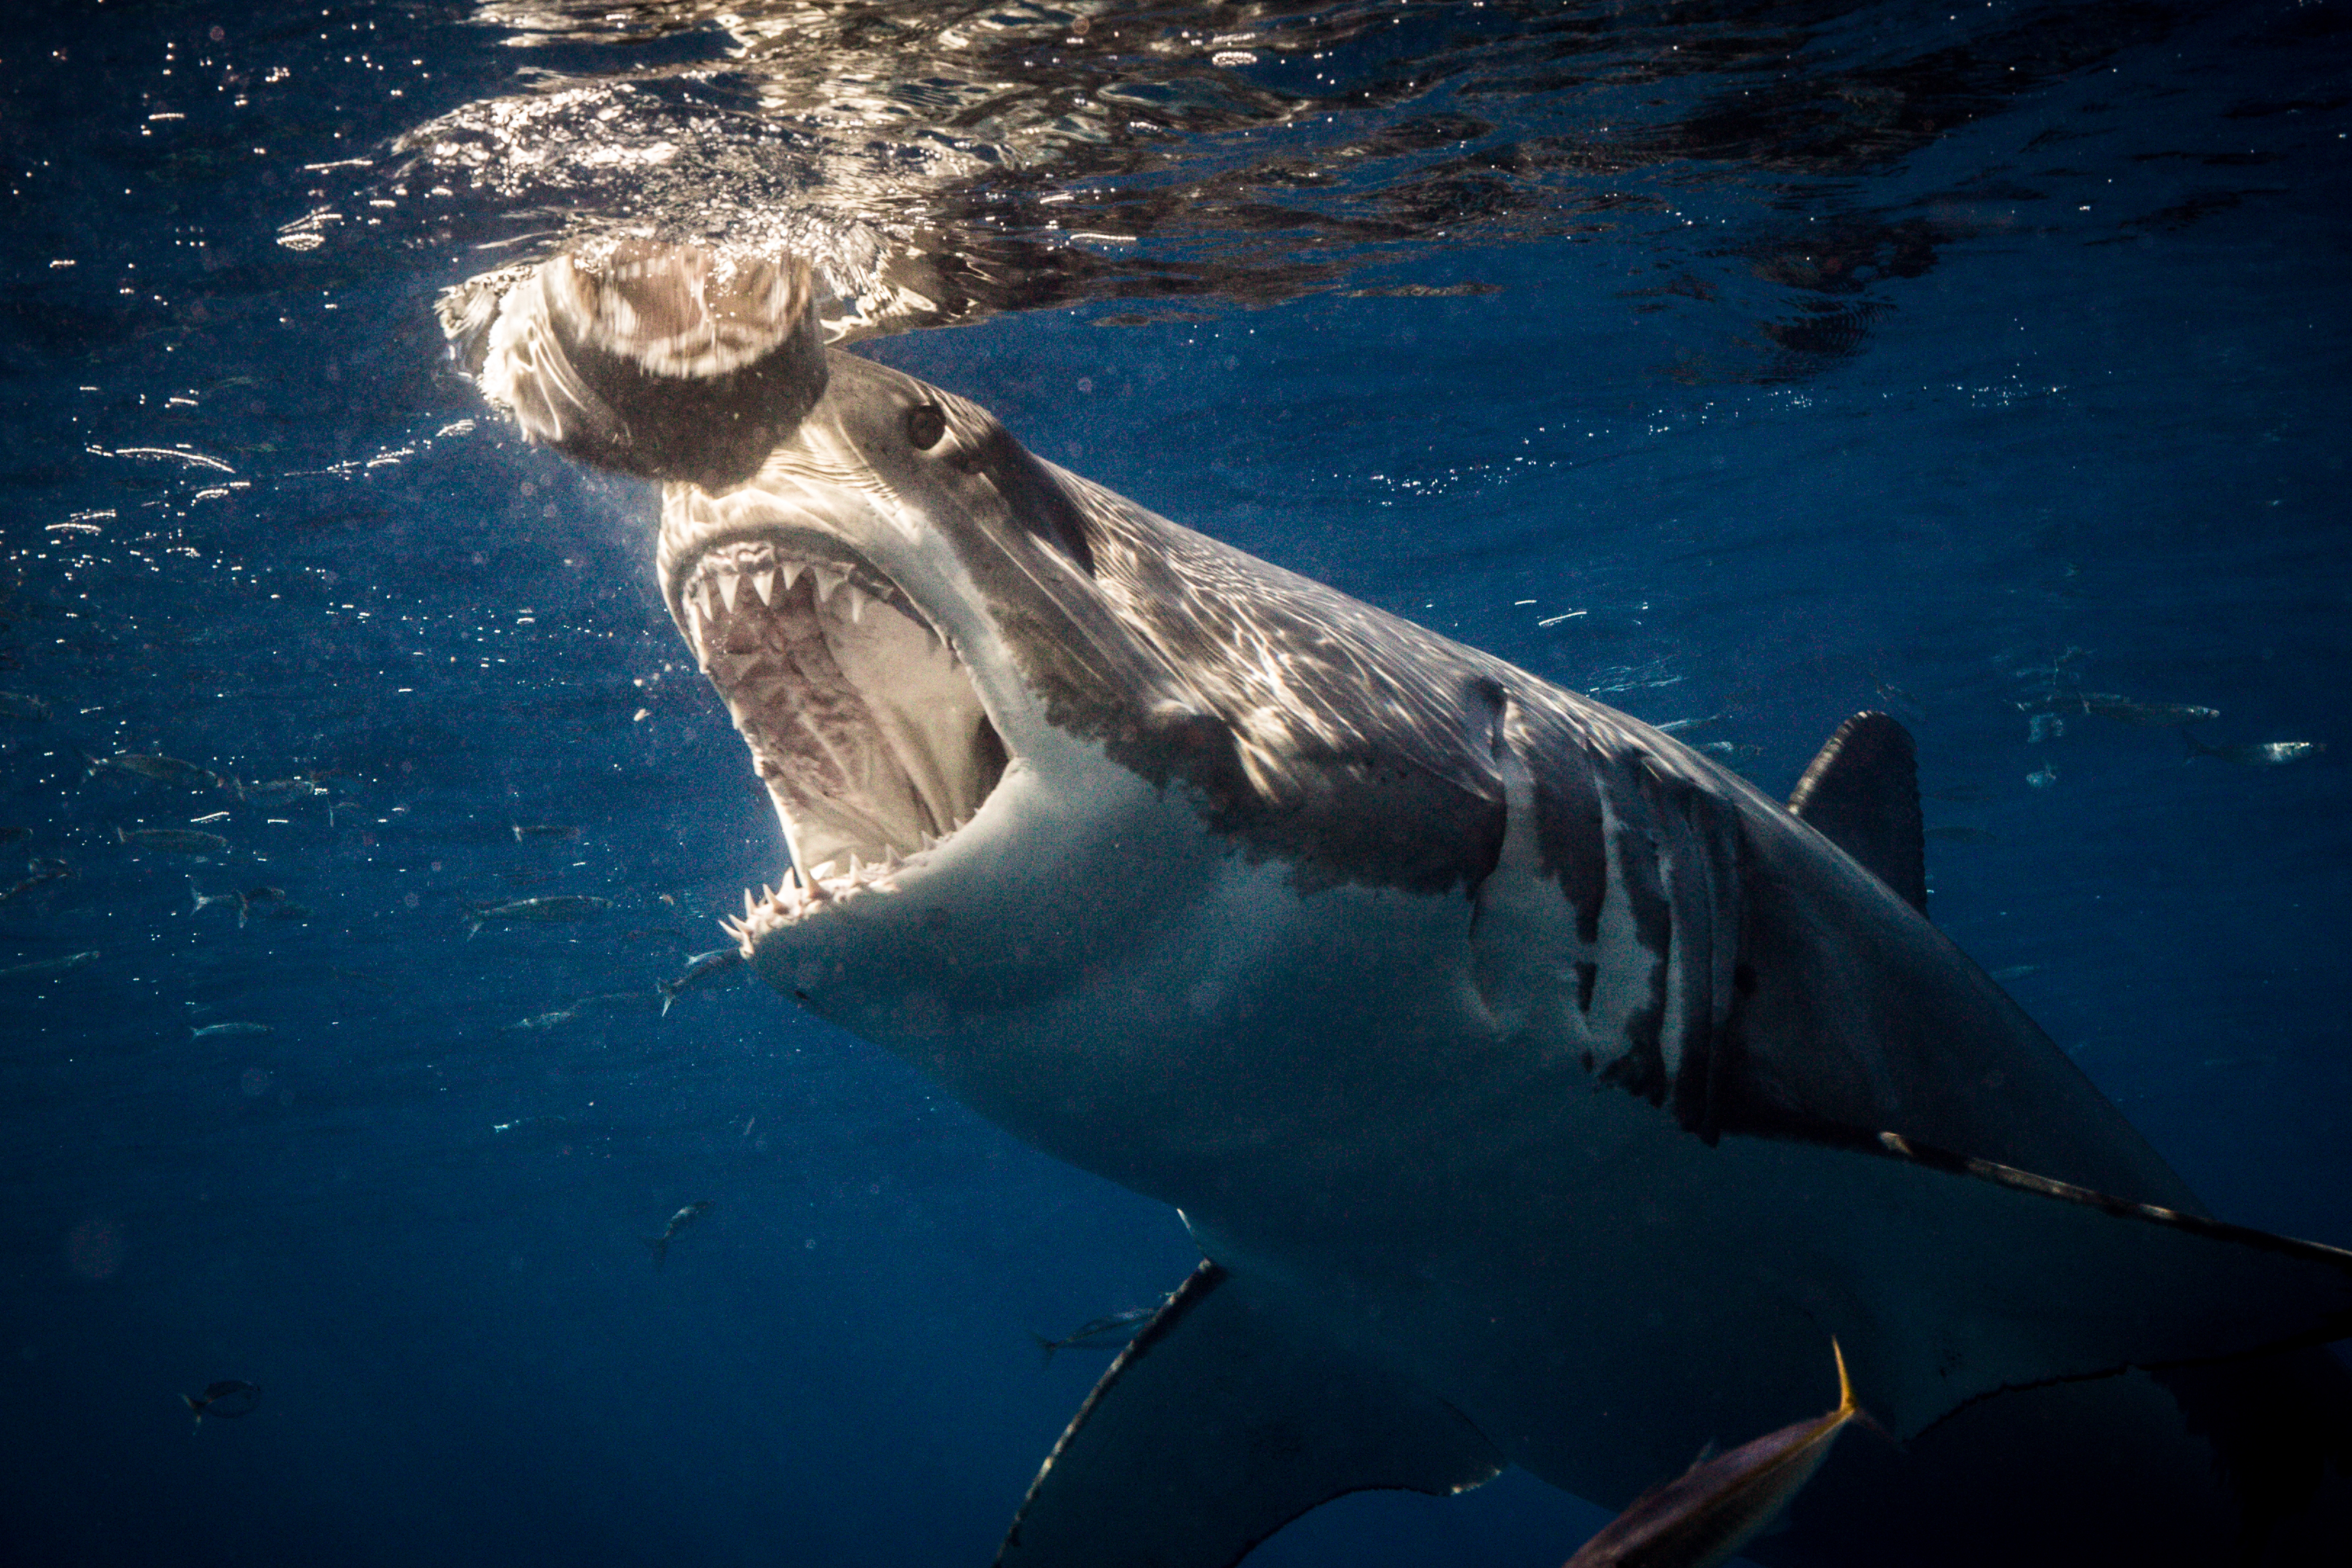 What Types of Sharks Are Found in U.S. Waters and Are They Dangerous?